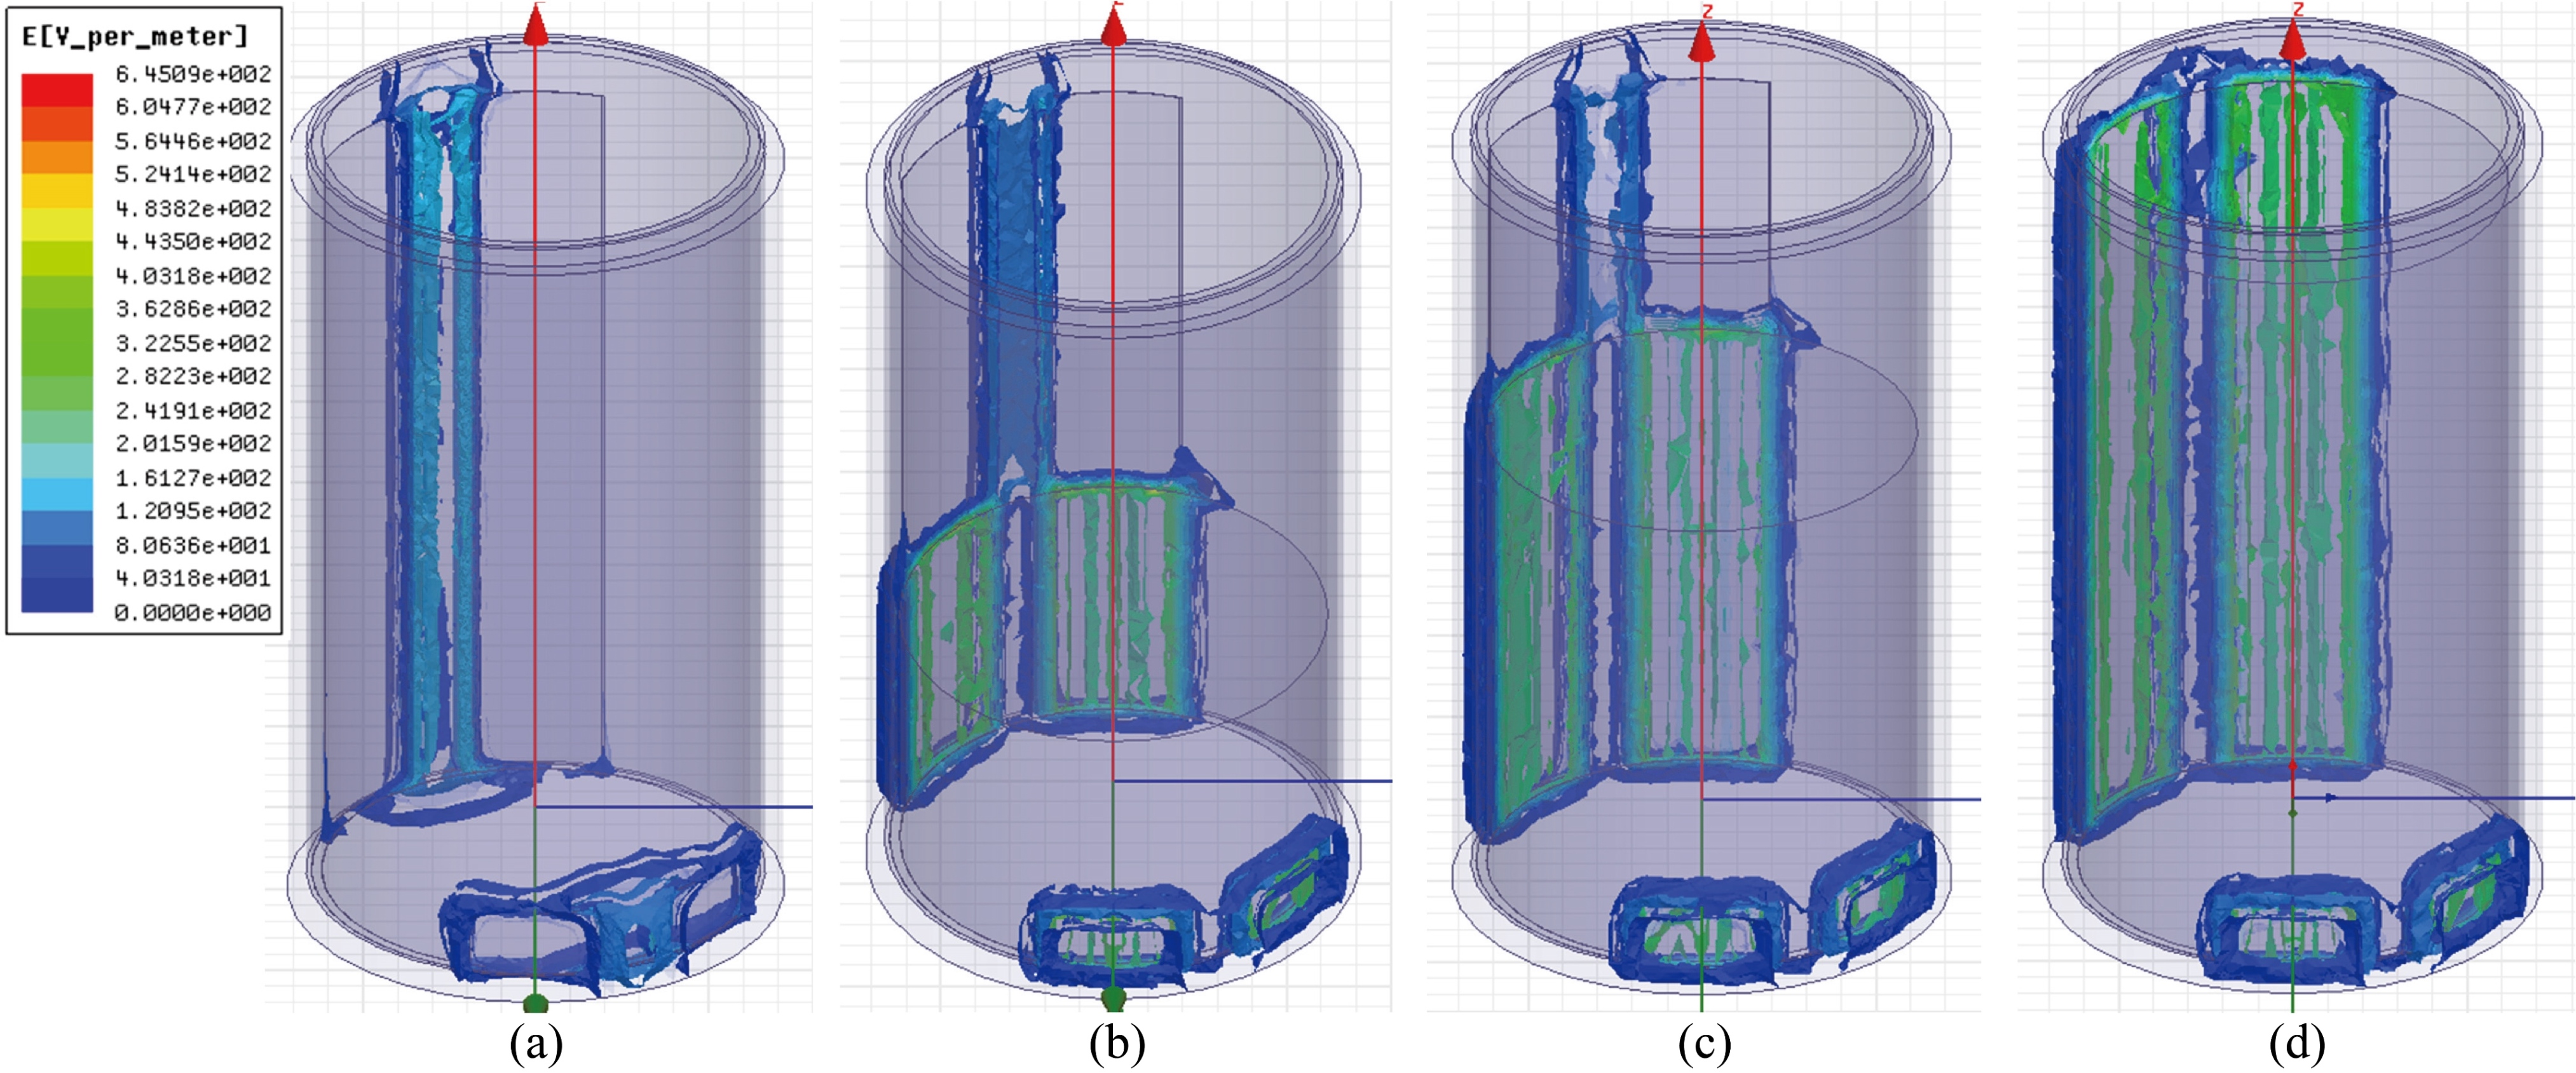 Pictures of the simulation result for the electrical field intensity variation of the capacitive sensor in the 3D FEA simulation as the water level increased. (a) 0 cm; (b) 3 cm; (c) 6 cm; (d) 10 cm.